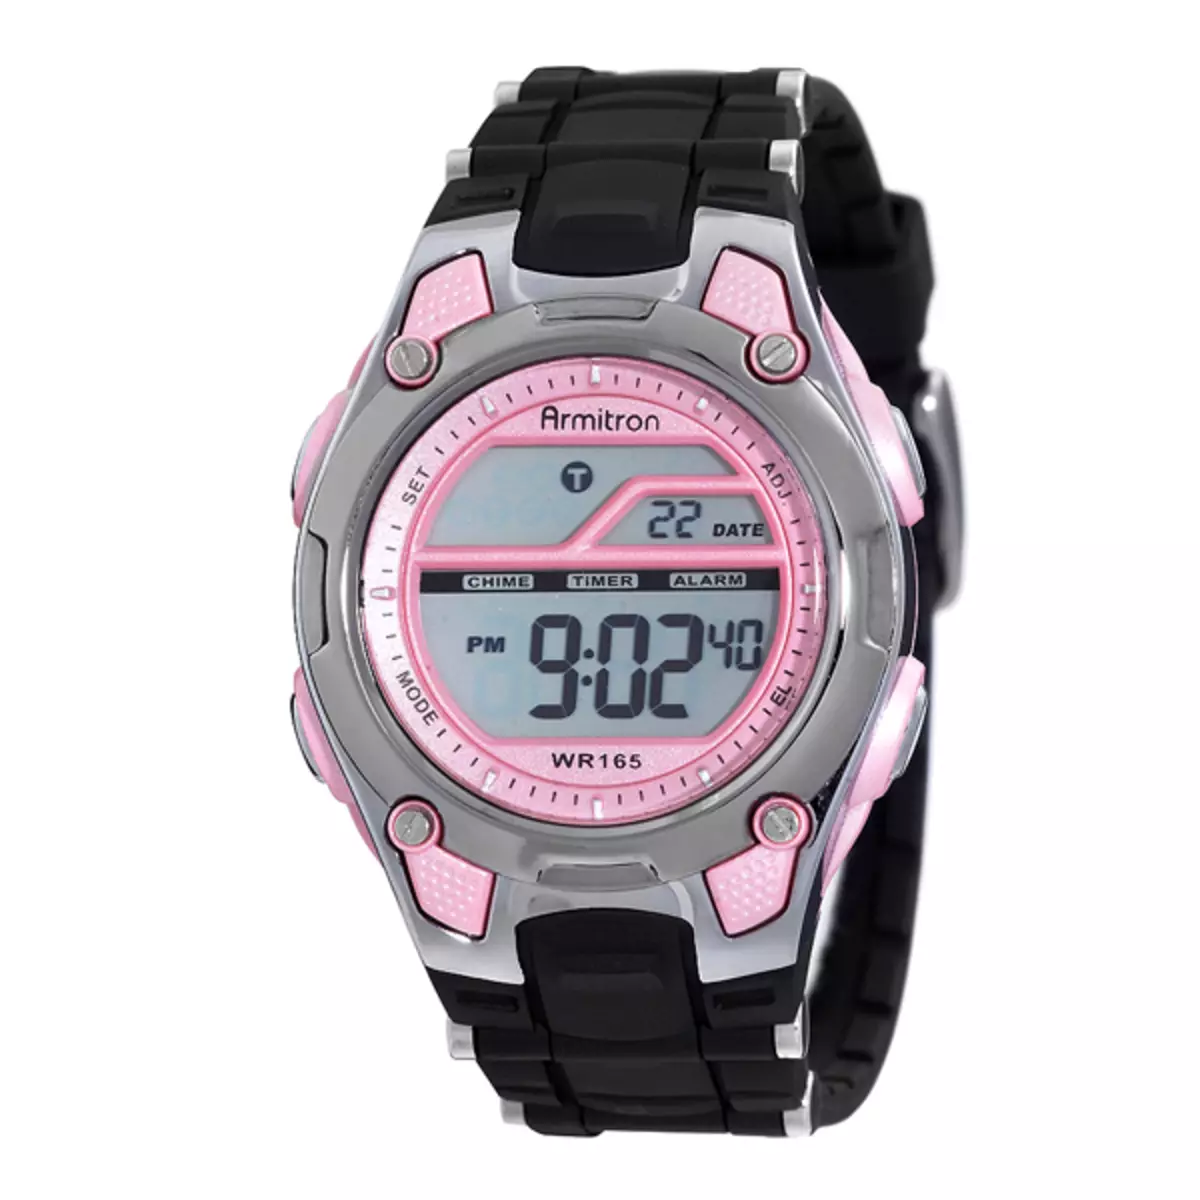 Sports watch (104 photos): buy models with pulsometer, pedometer and tonometer, female wrist devices 3541_50